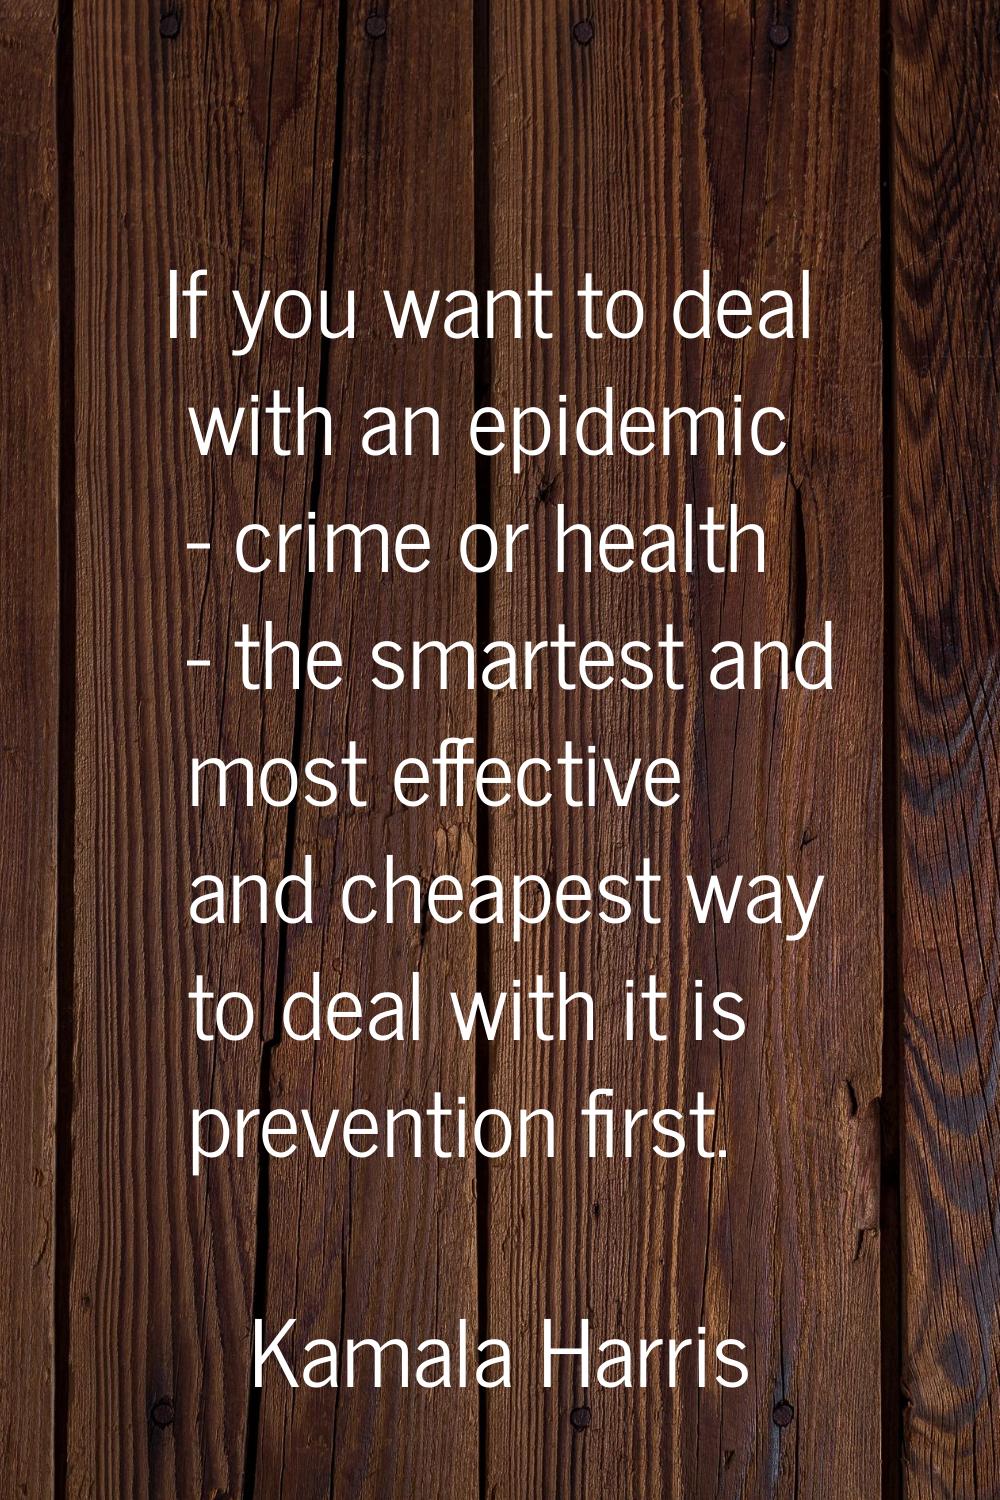 If you want to deal with an epidemic - crime or health - the smartest and most effective and cheape